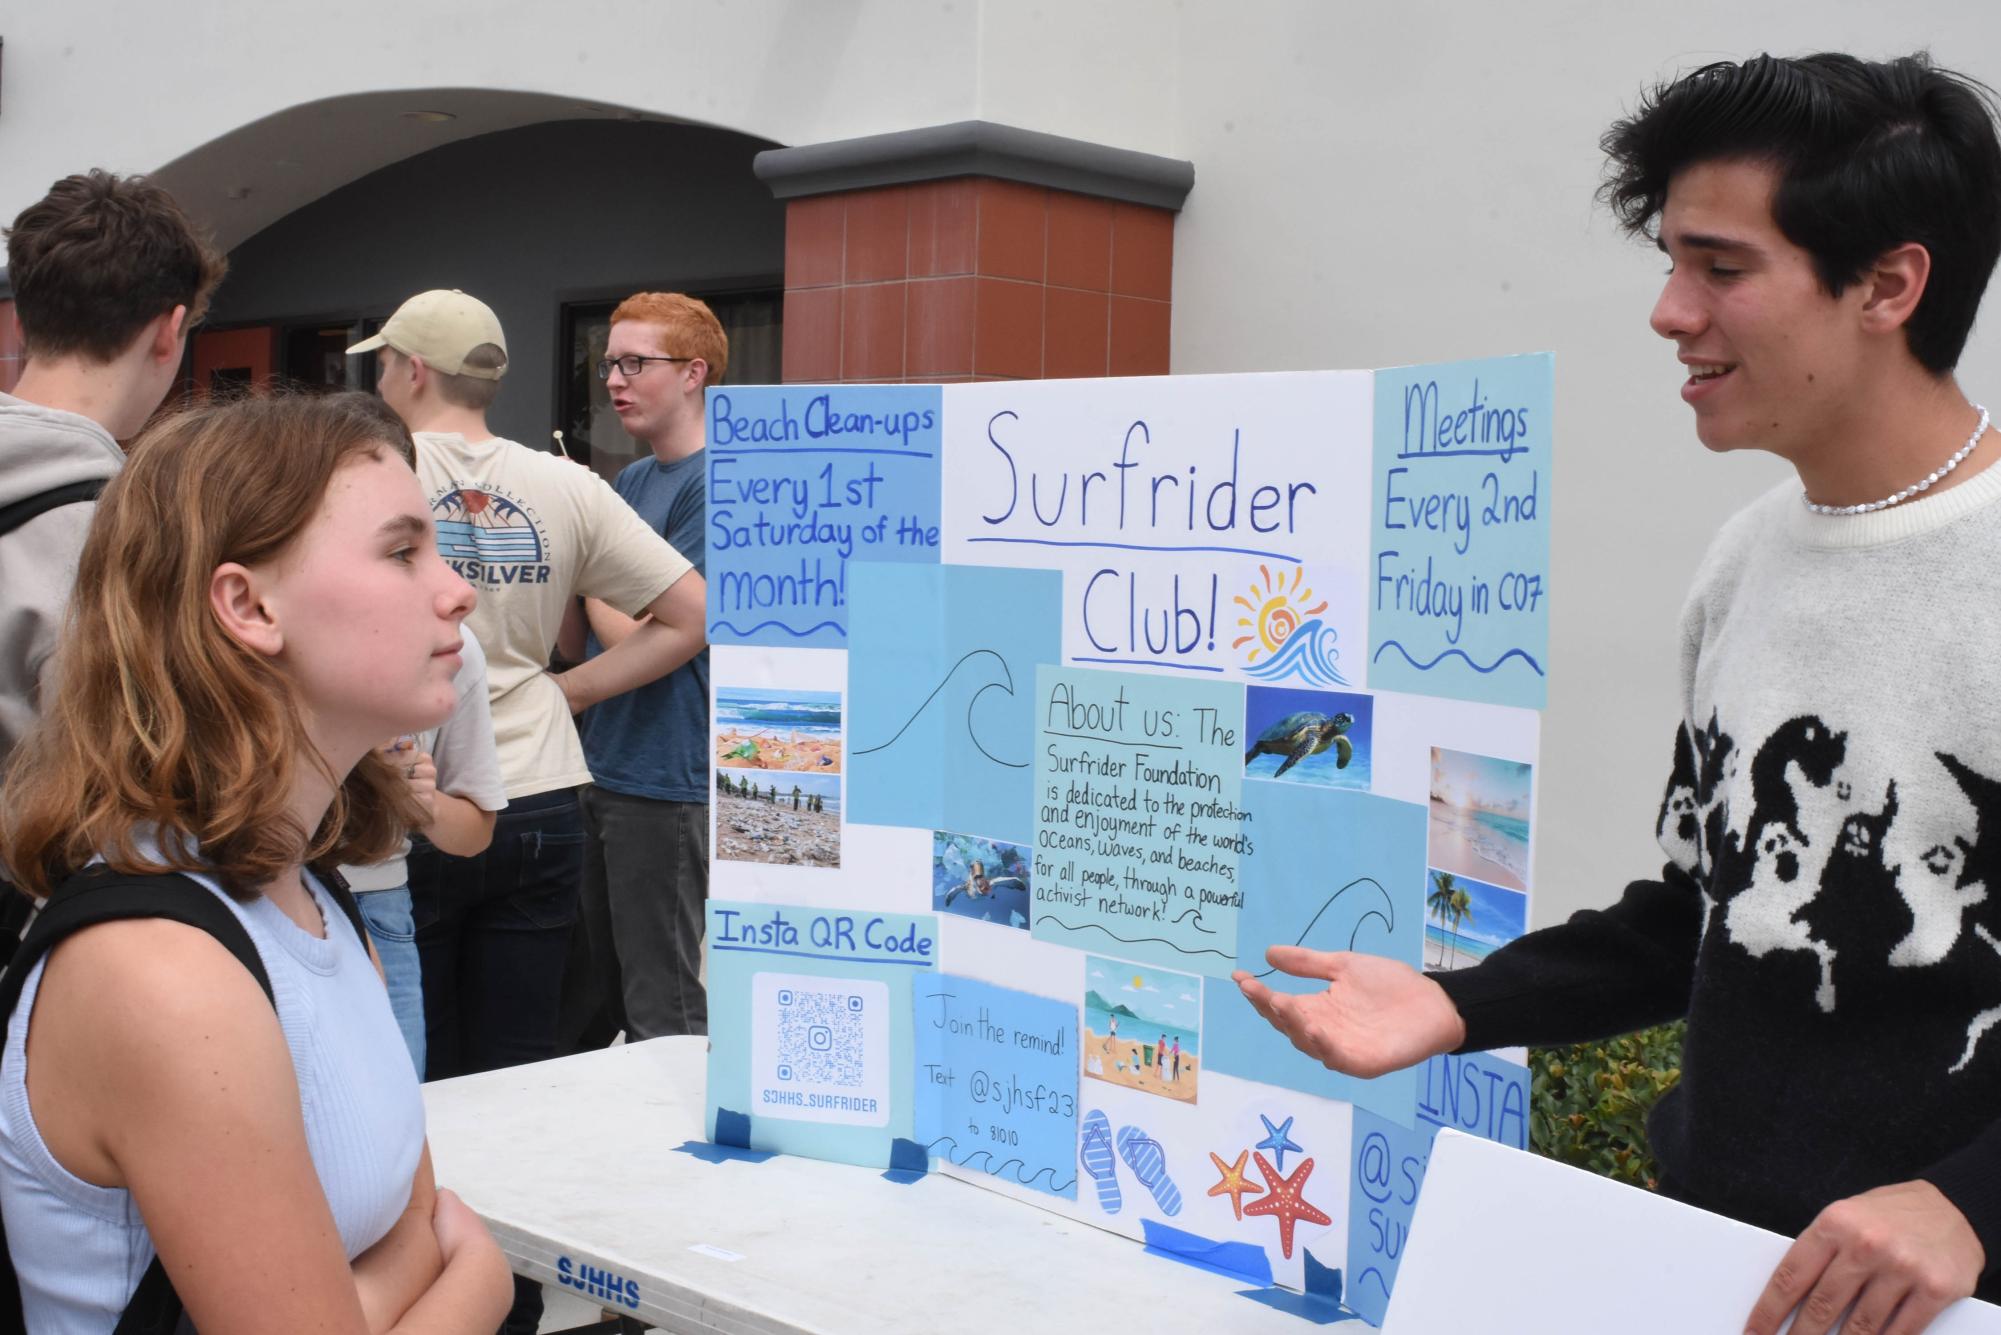 The Surfrider Club at San Juan Hills is reaching out to new students during Club Rush. Clubs concerning beach clean-ups, breakfast, and sports cars are campaigning for members, hoping to find like-minded people across campus.